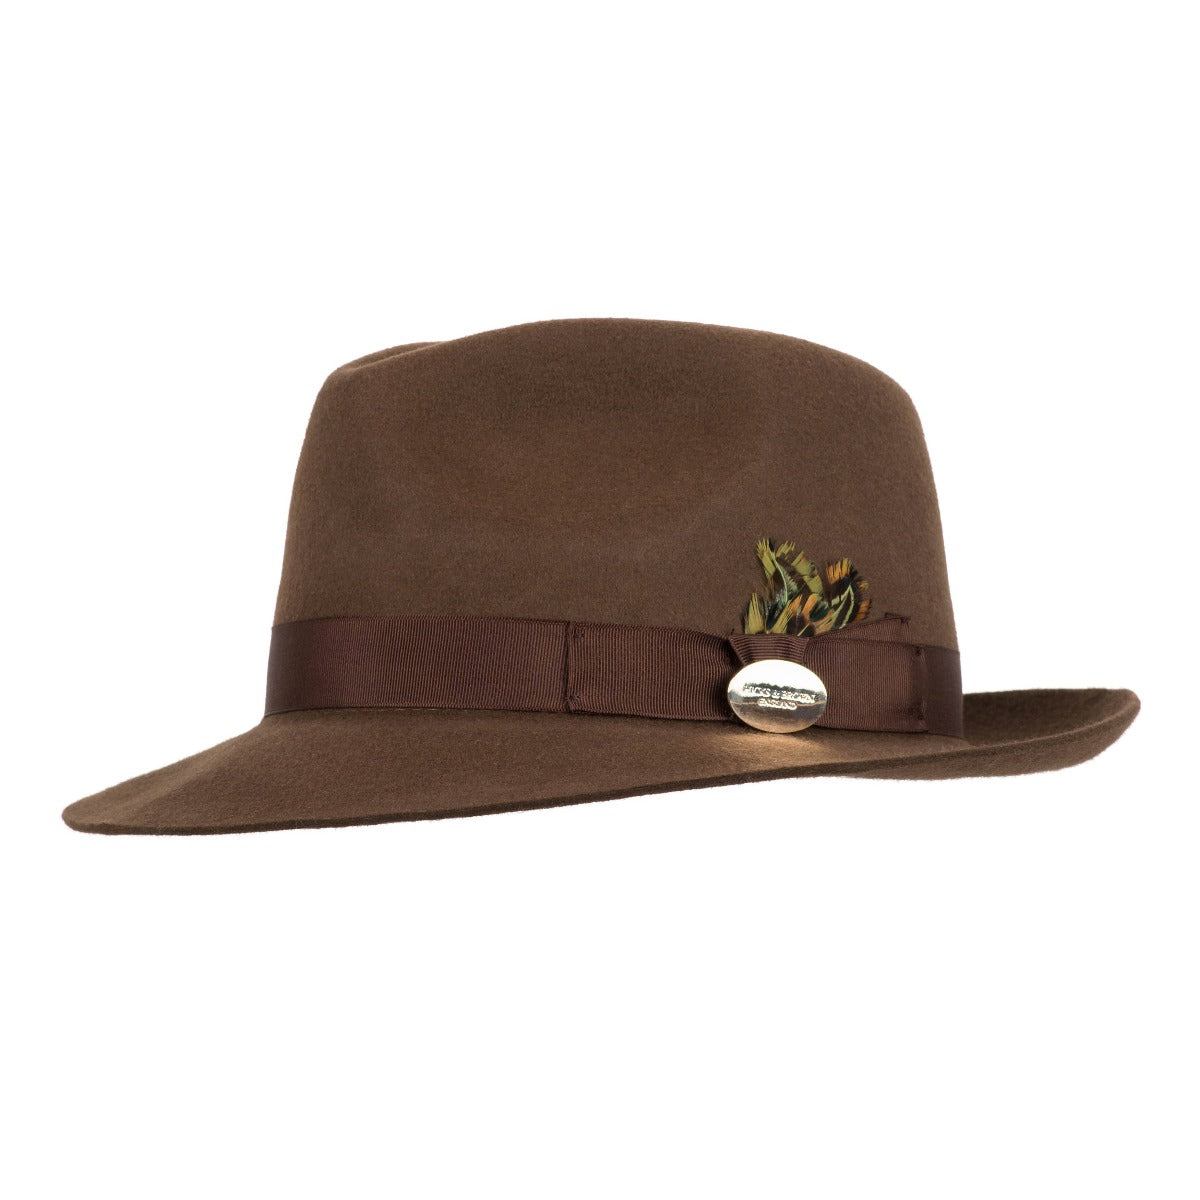 Hicks & Brown Womens Melford Trilby Hat